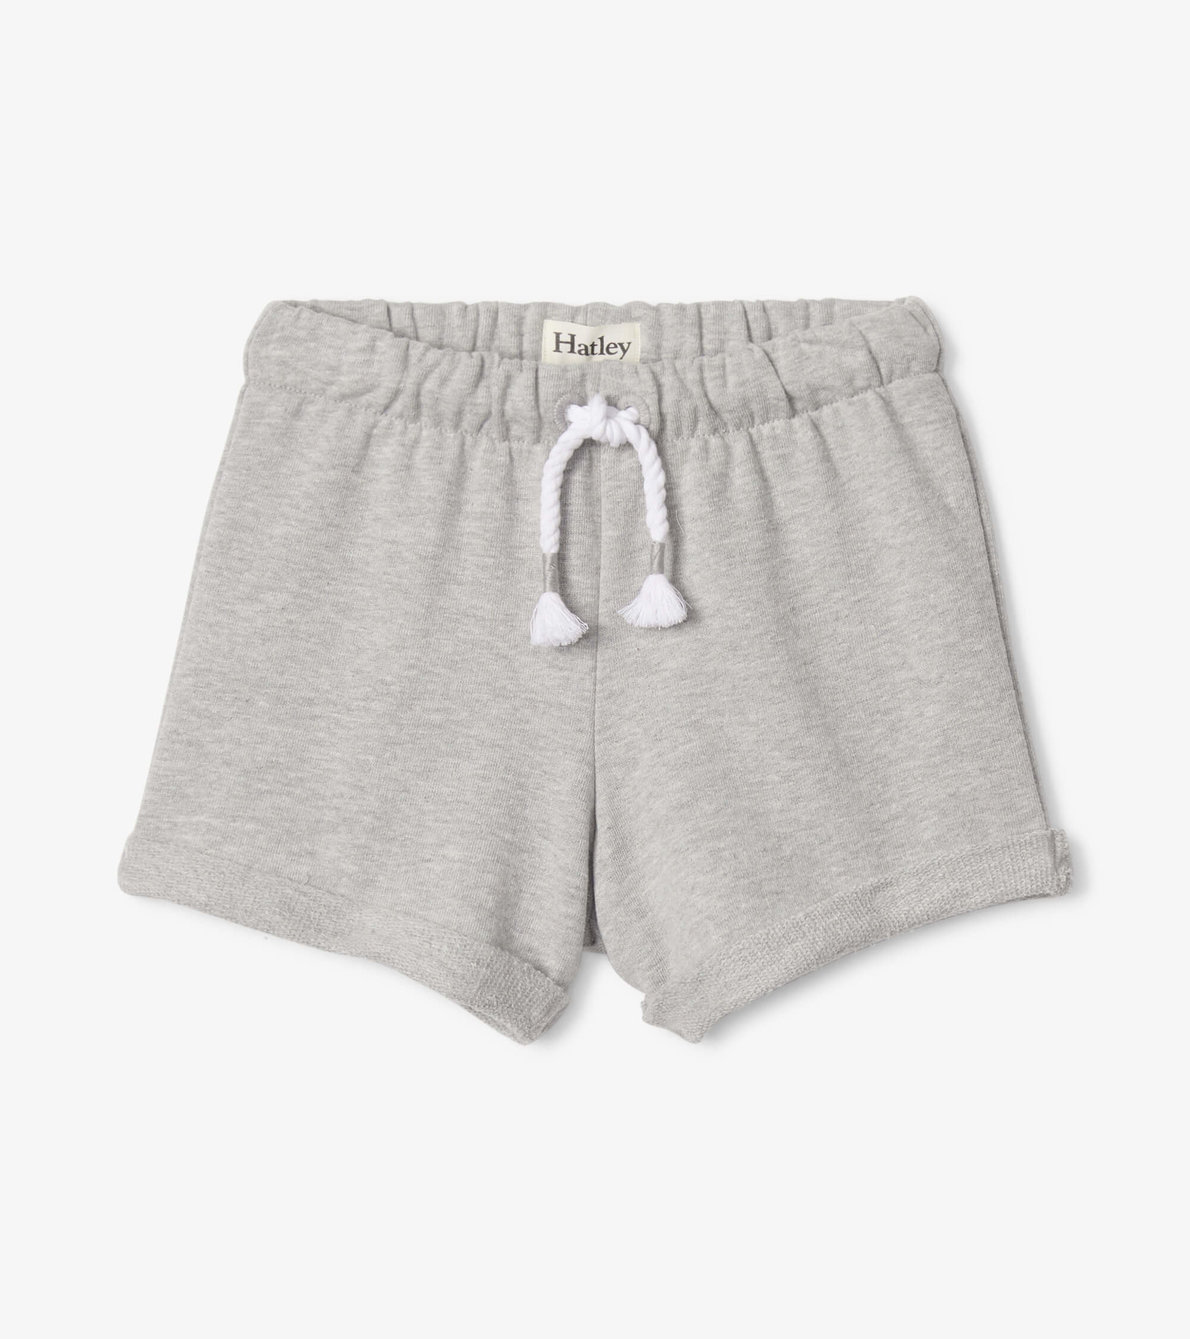 View larger image of Baby & Toddler Boys Athletic Grey Pull On Shorts